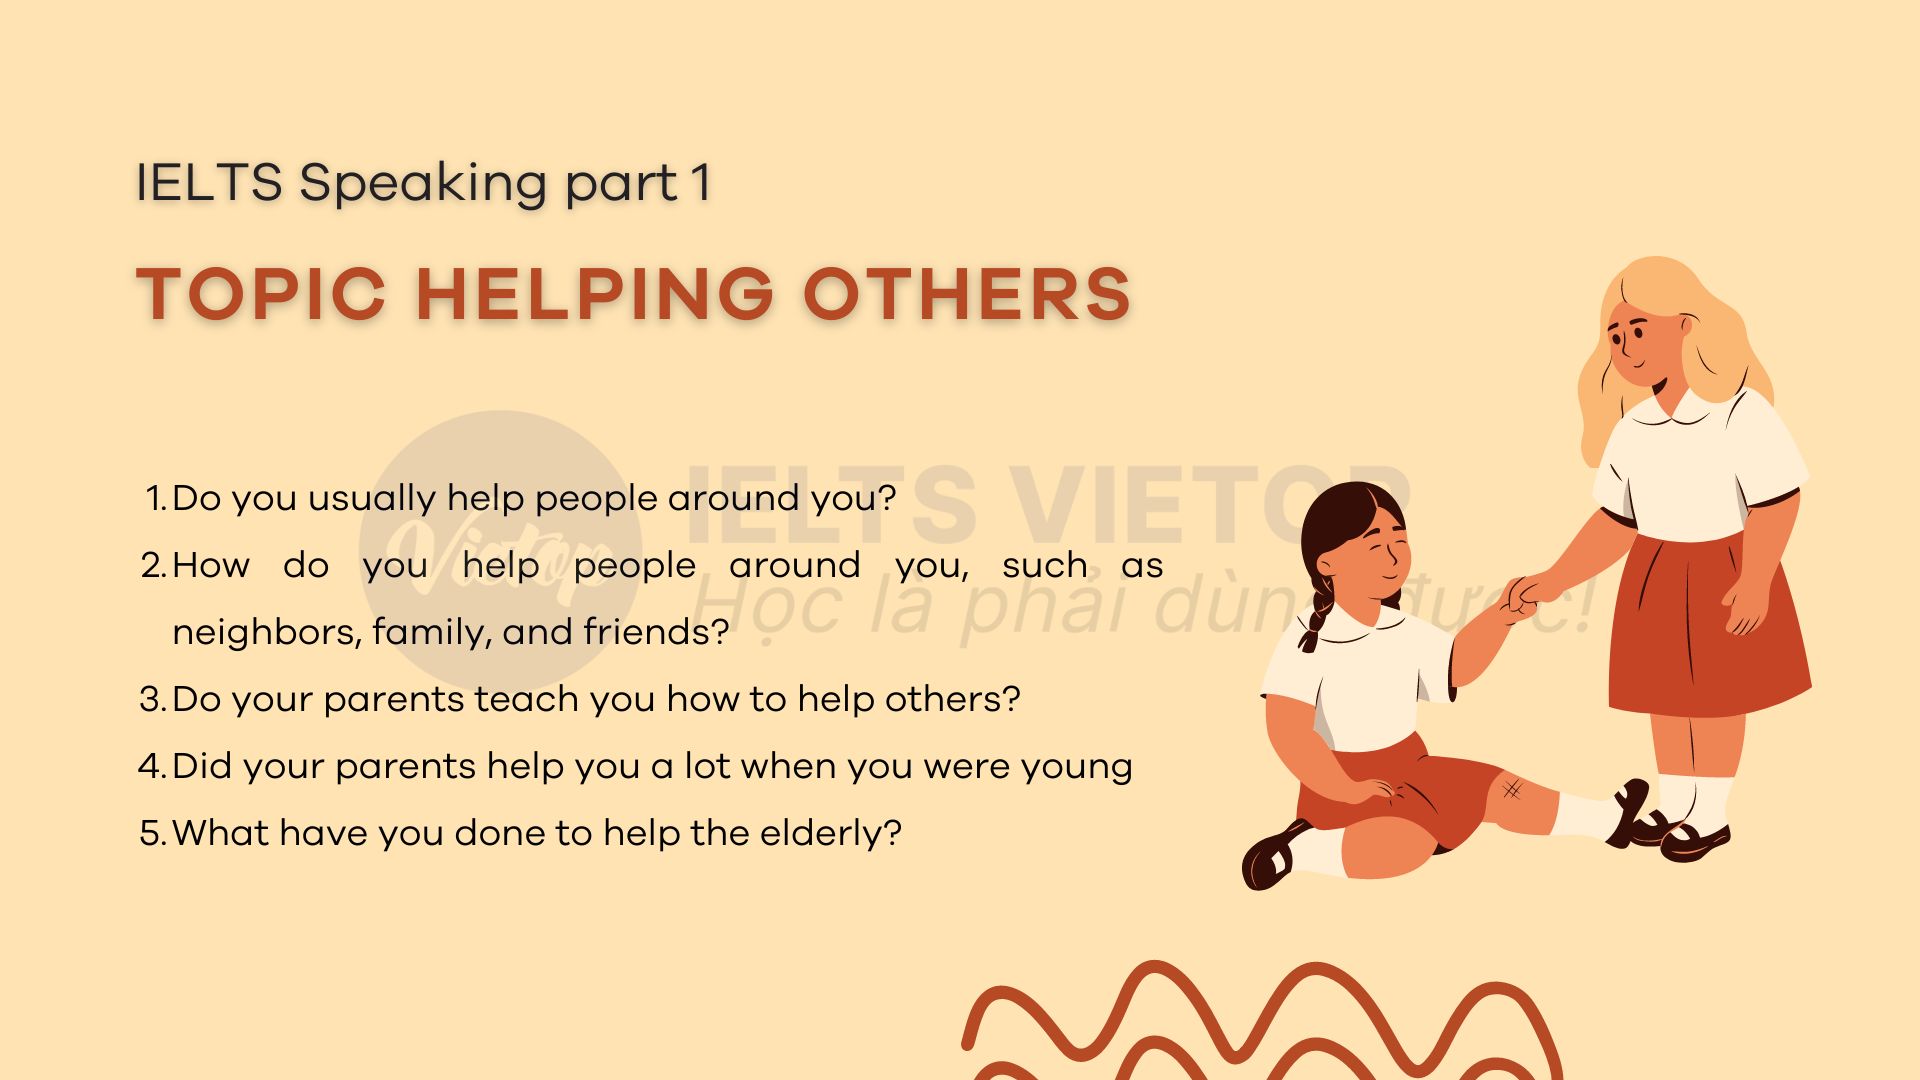 Topic helping others - IELTS Speaking part 1